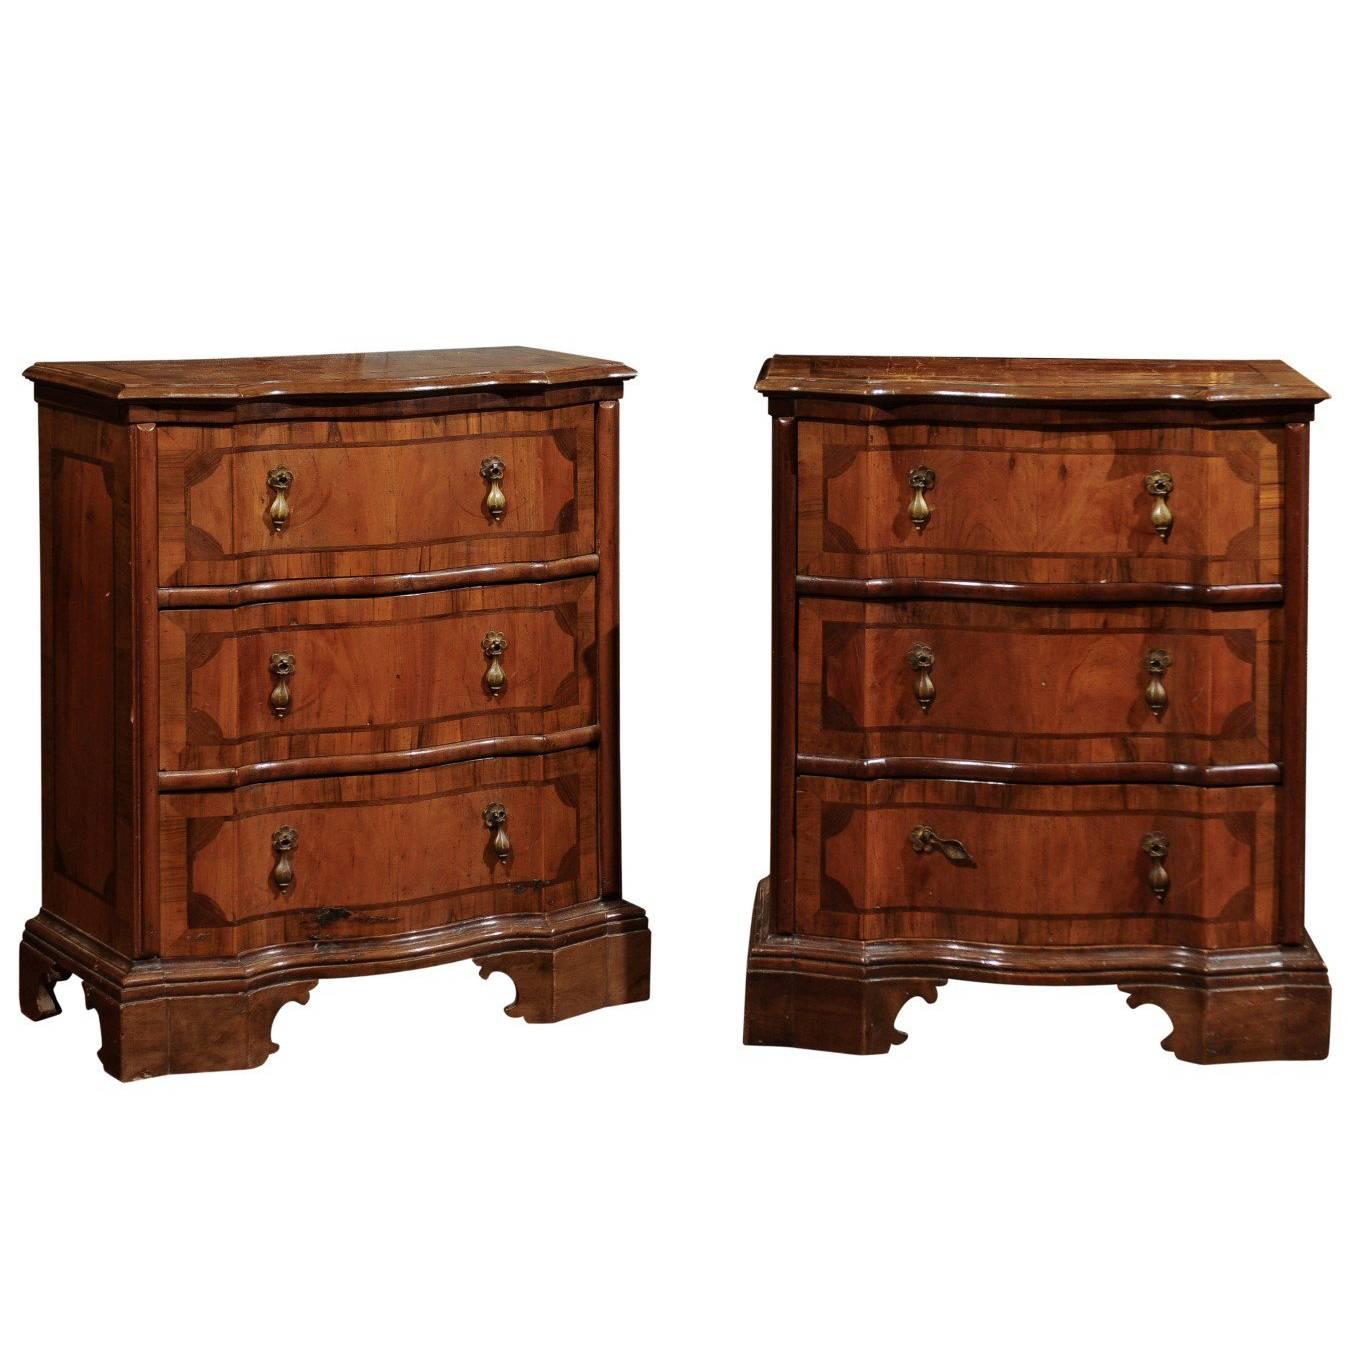 Pair of Italian Petite Walnut Inlaid Commodes with Serpentine Front, circa 1890